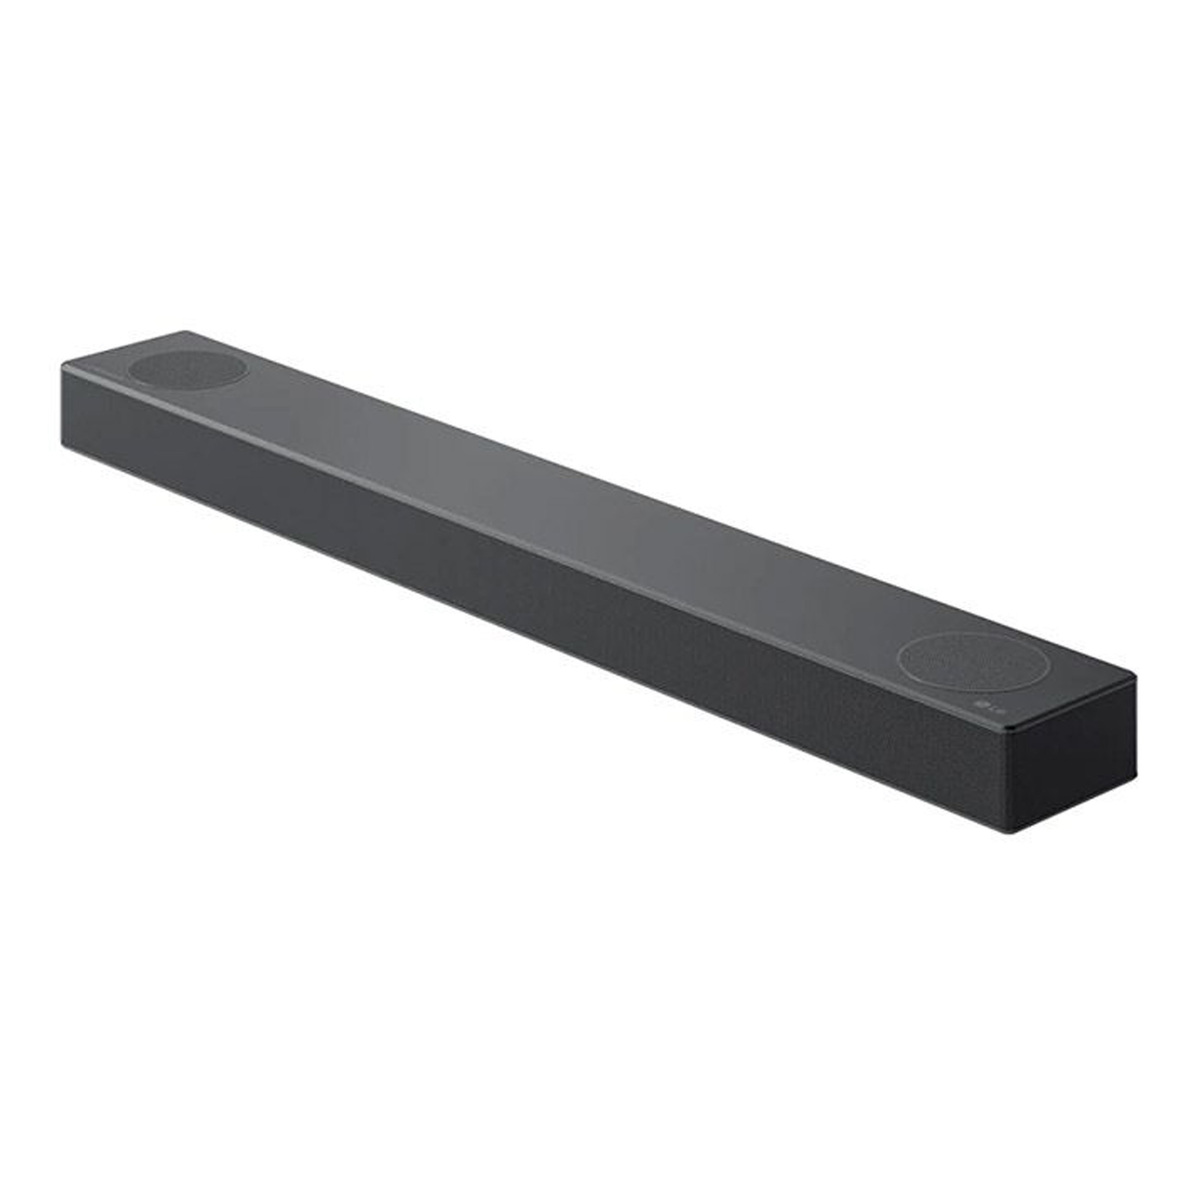 LG 5.1.2 ch Sound Bar with Dolby Atmos and Surround Speakers, 520 W, Black, S75QR